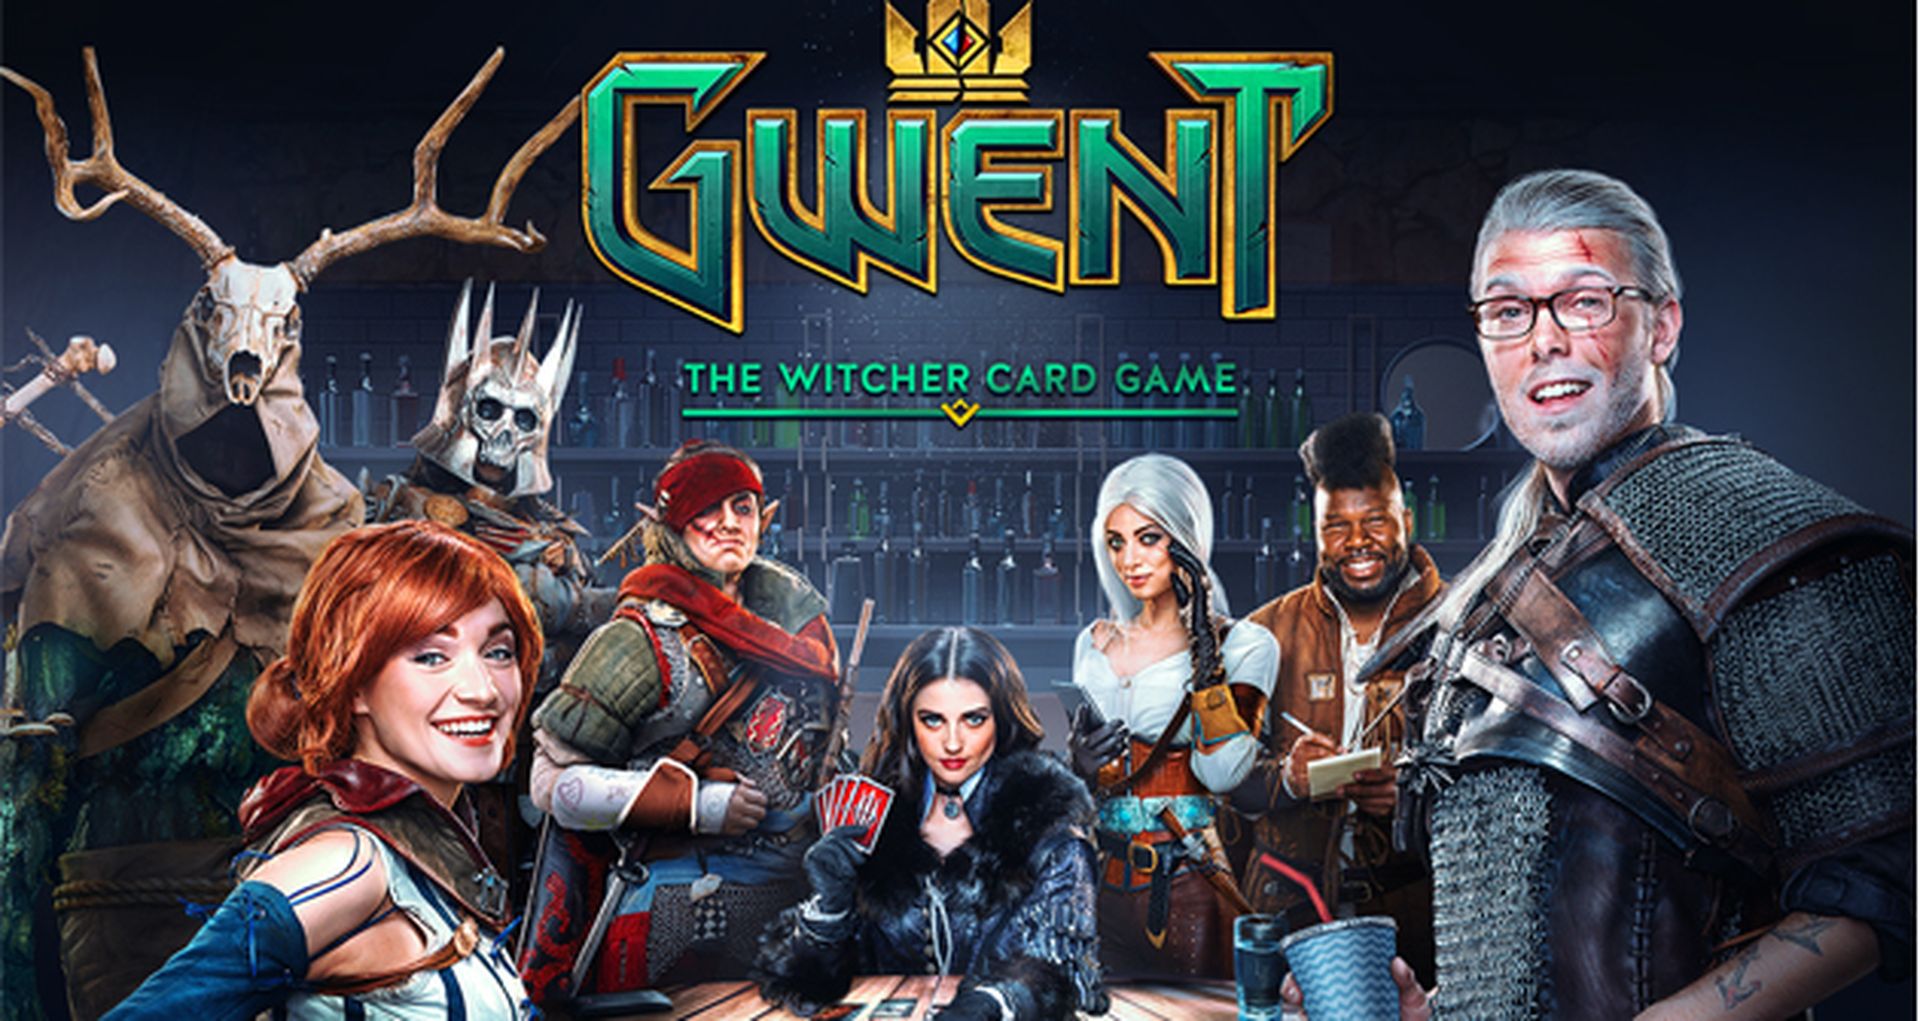 E3 2016 - Avance de Gwent: The Witcher Card Game